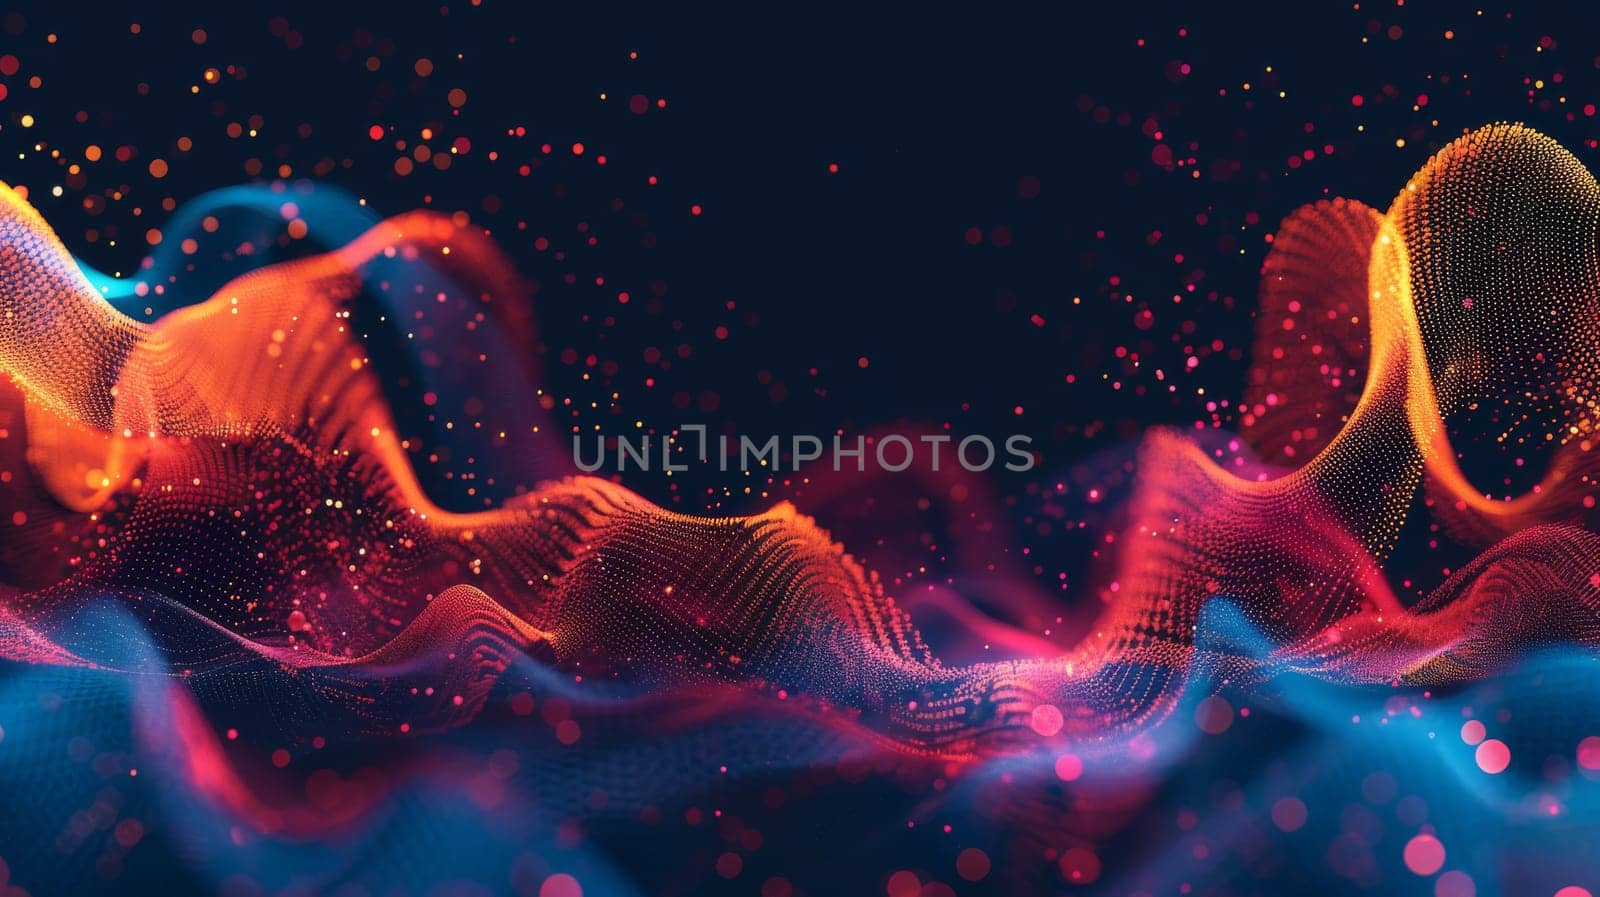 A colorful wave of light with a red and orange section. The wave is surrounded by a dark background